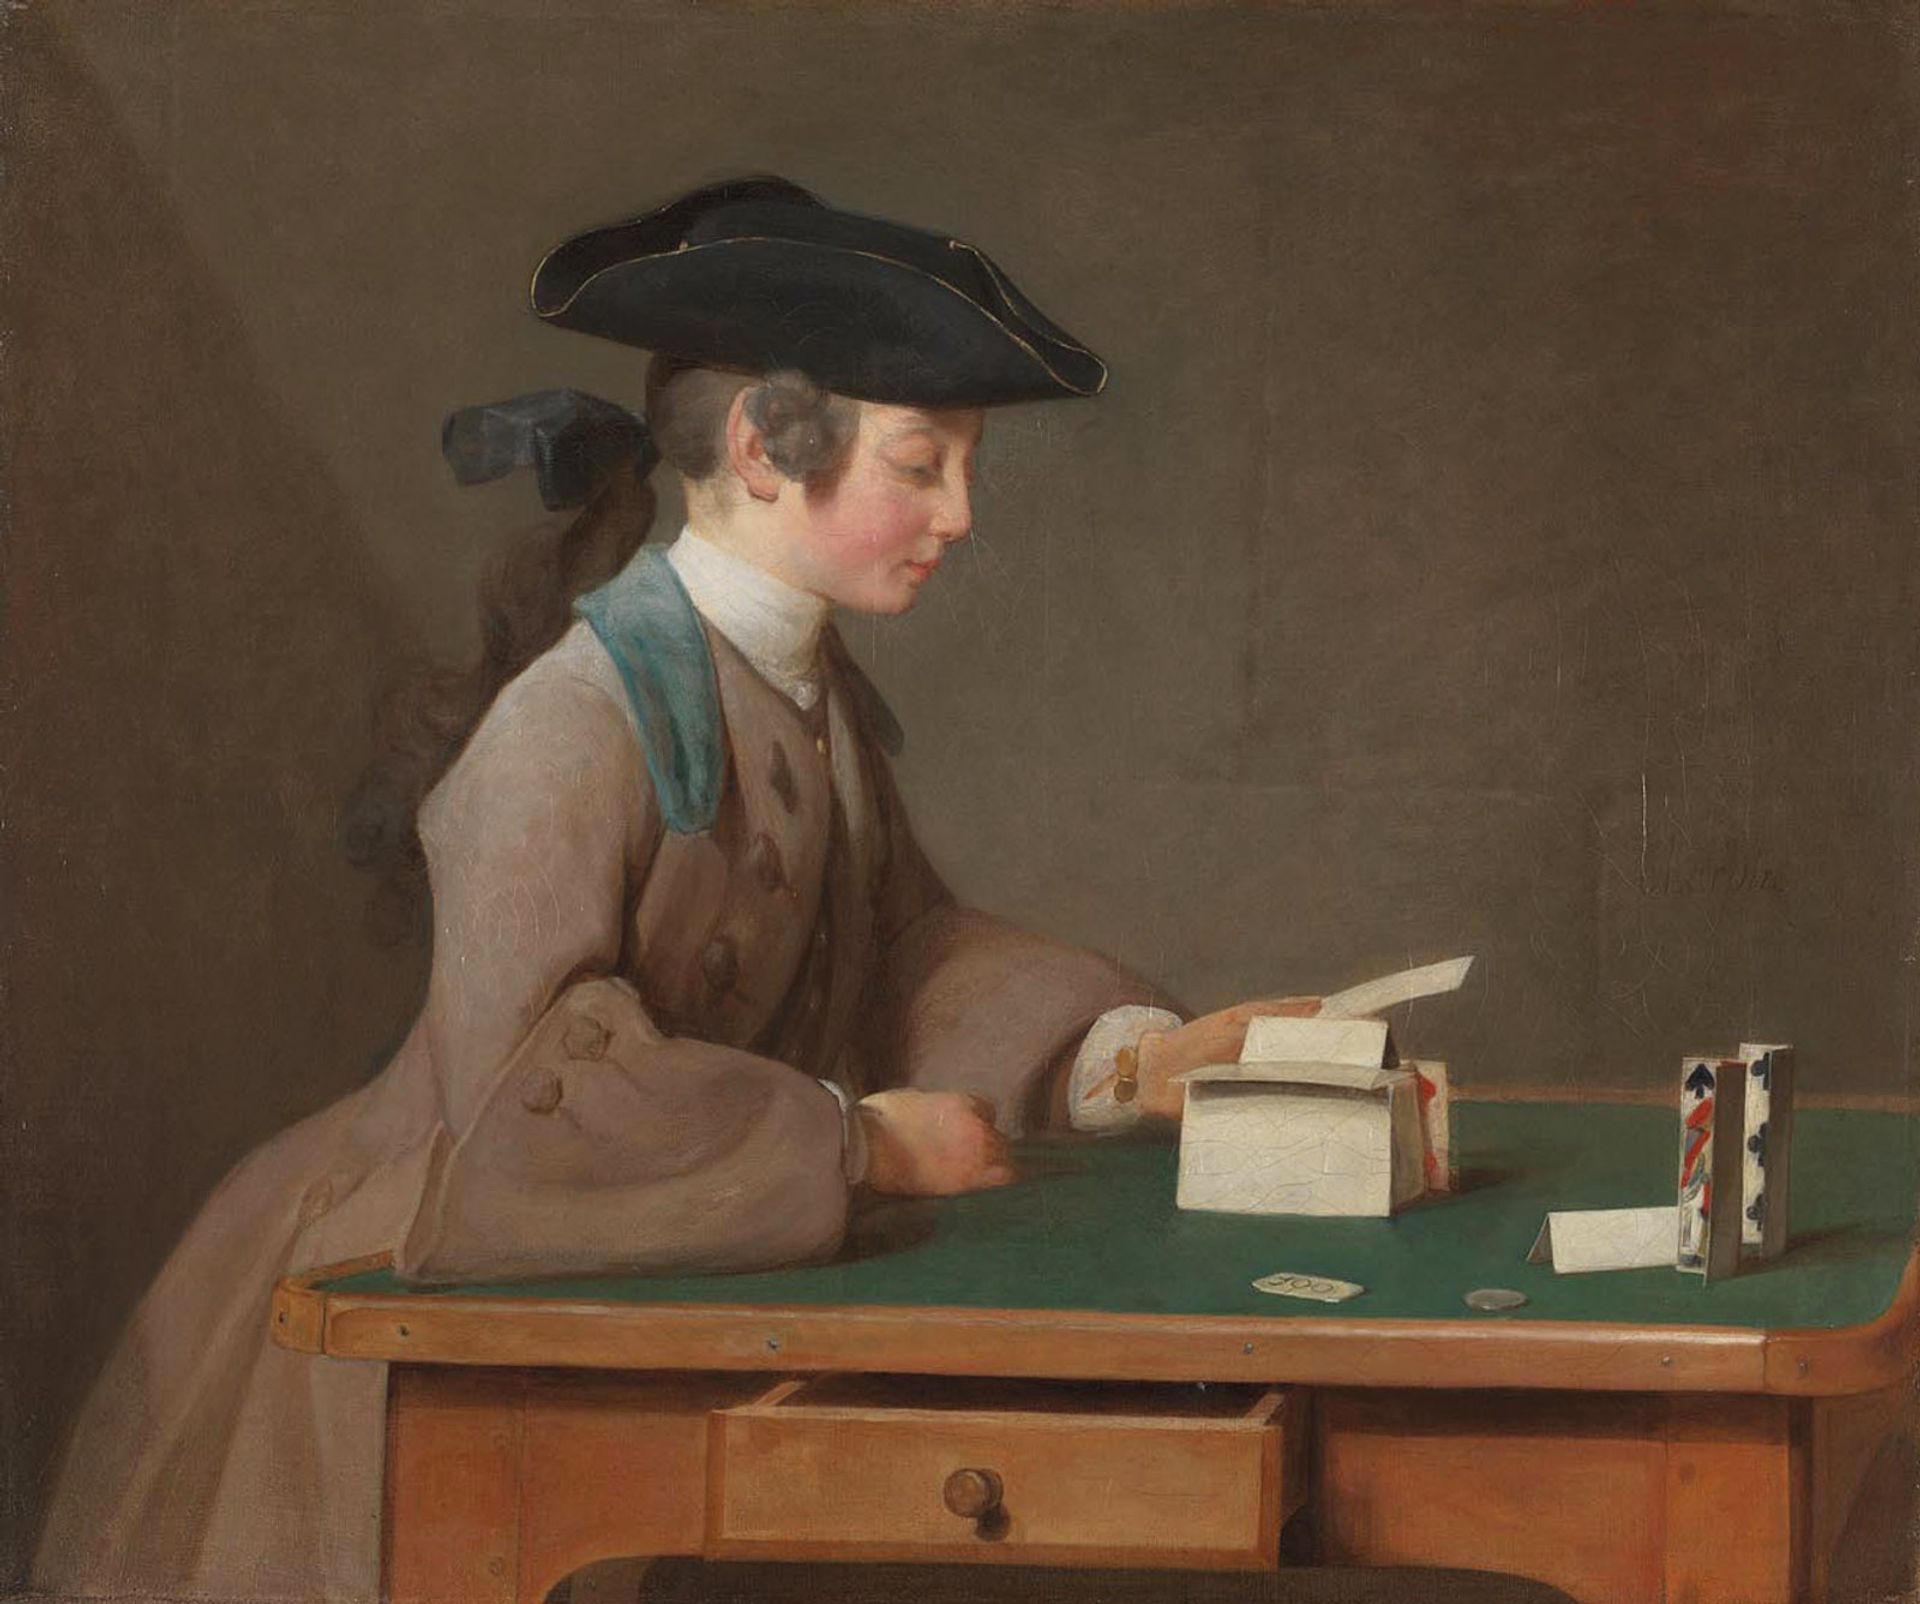 The House of Cards (1741) by Jean-Siméon Chardin is one of the great treasures of the National Gallery © The National Gallery, London